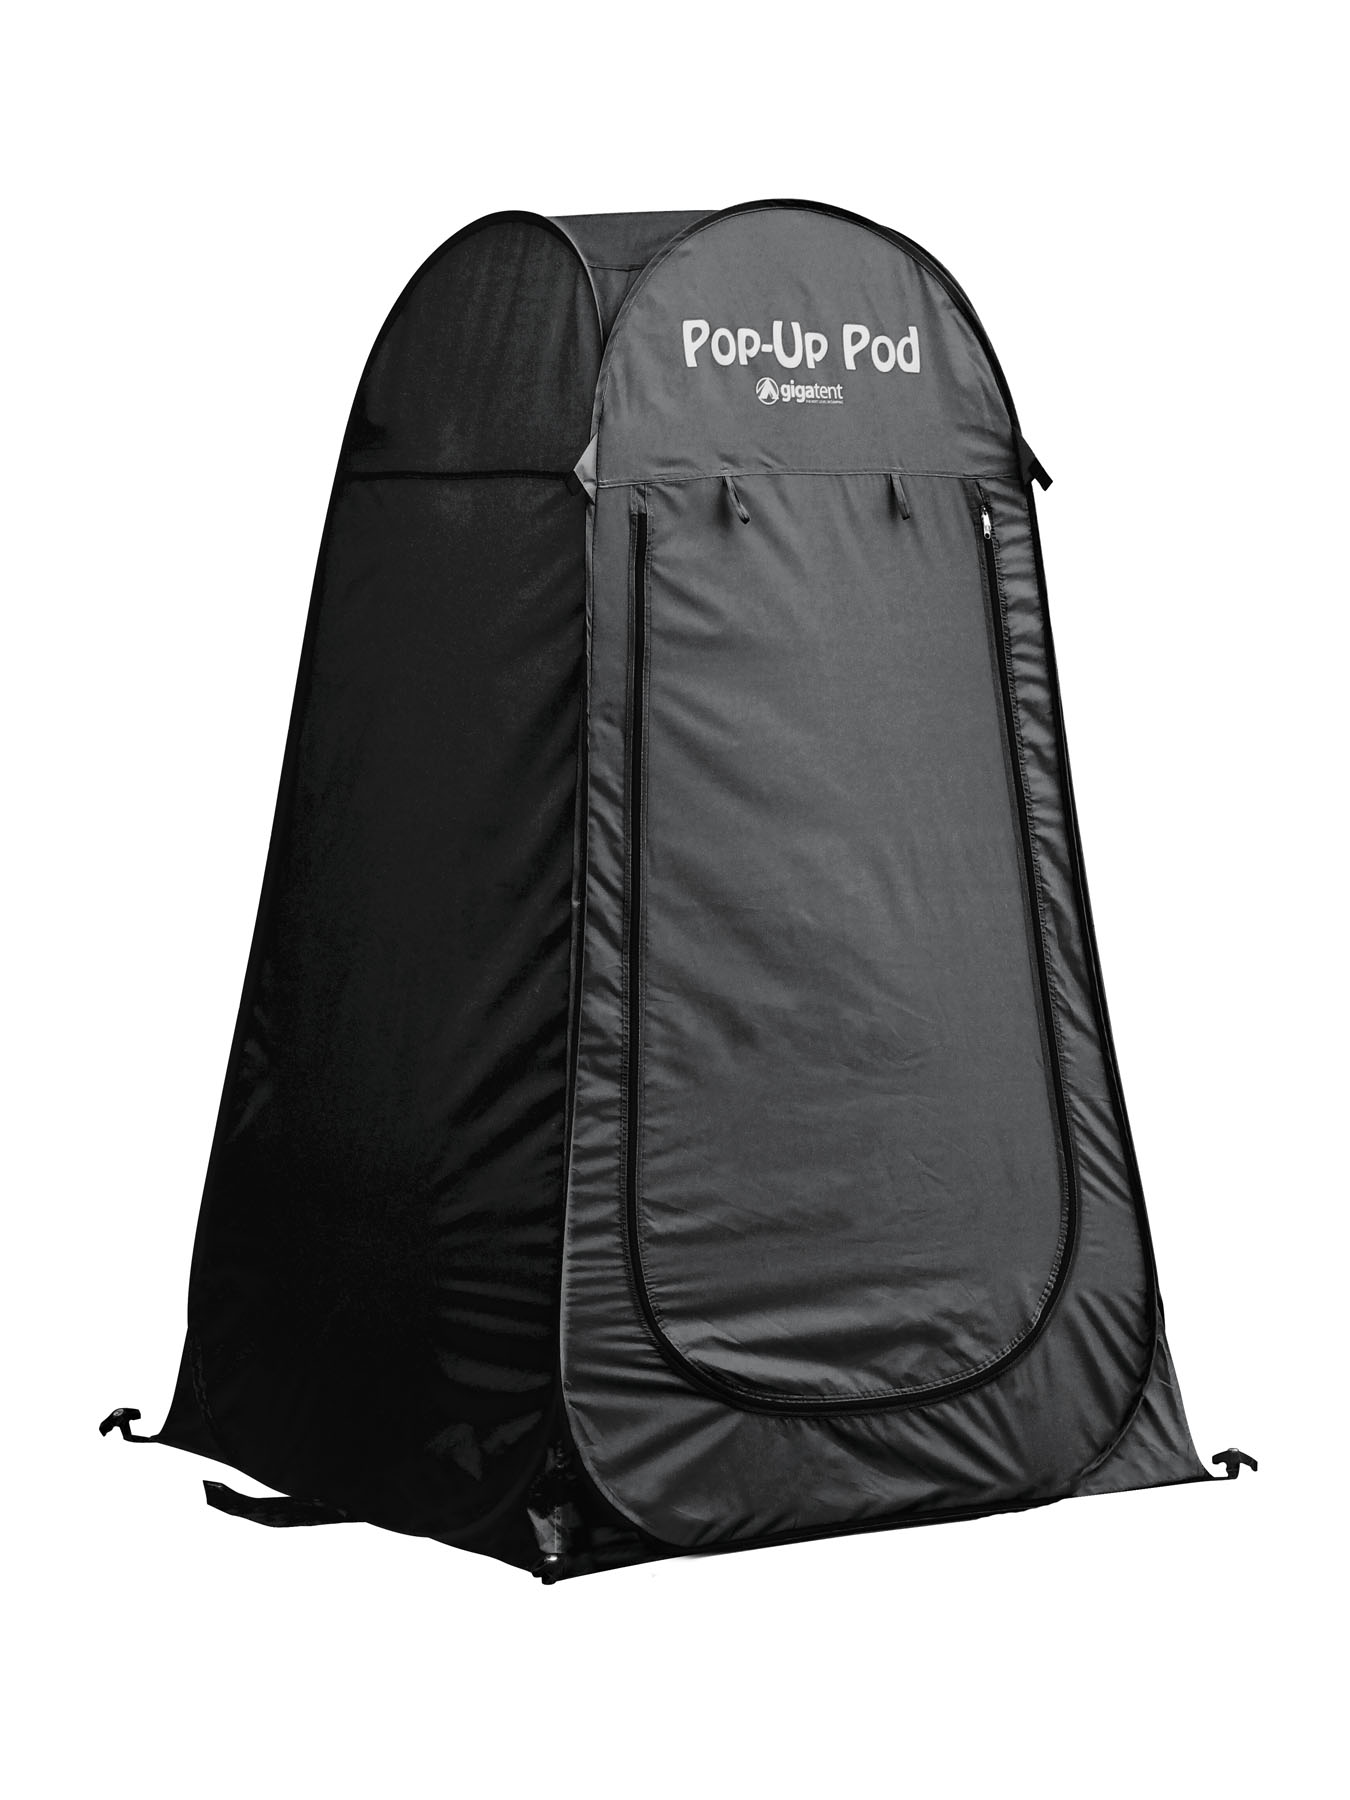 GigaTent 1-Person Pop Up Privacy Tent for Camping Changing Room, Portable Shower Station (Black) - image 1 of 7